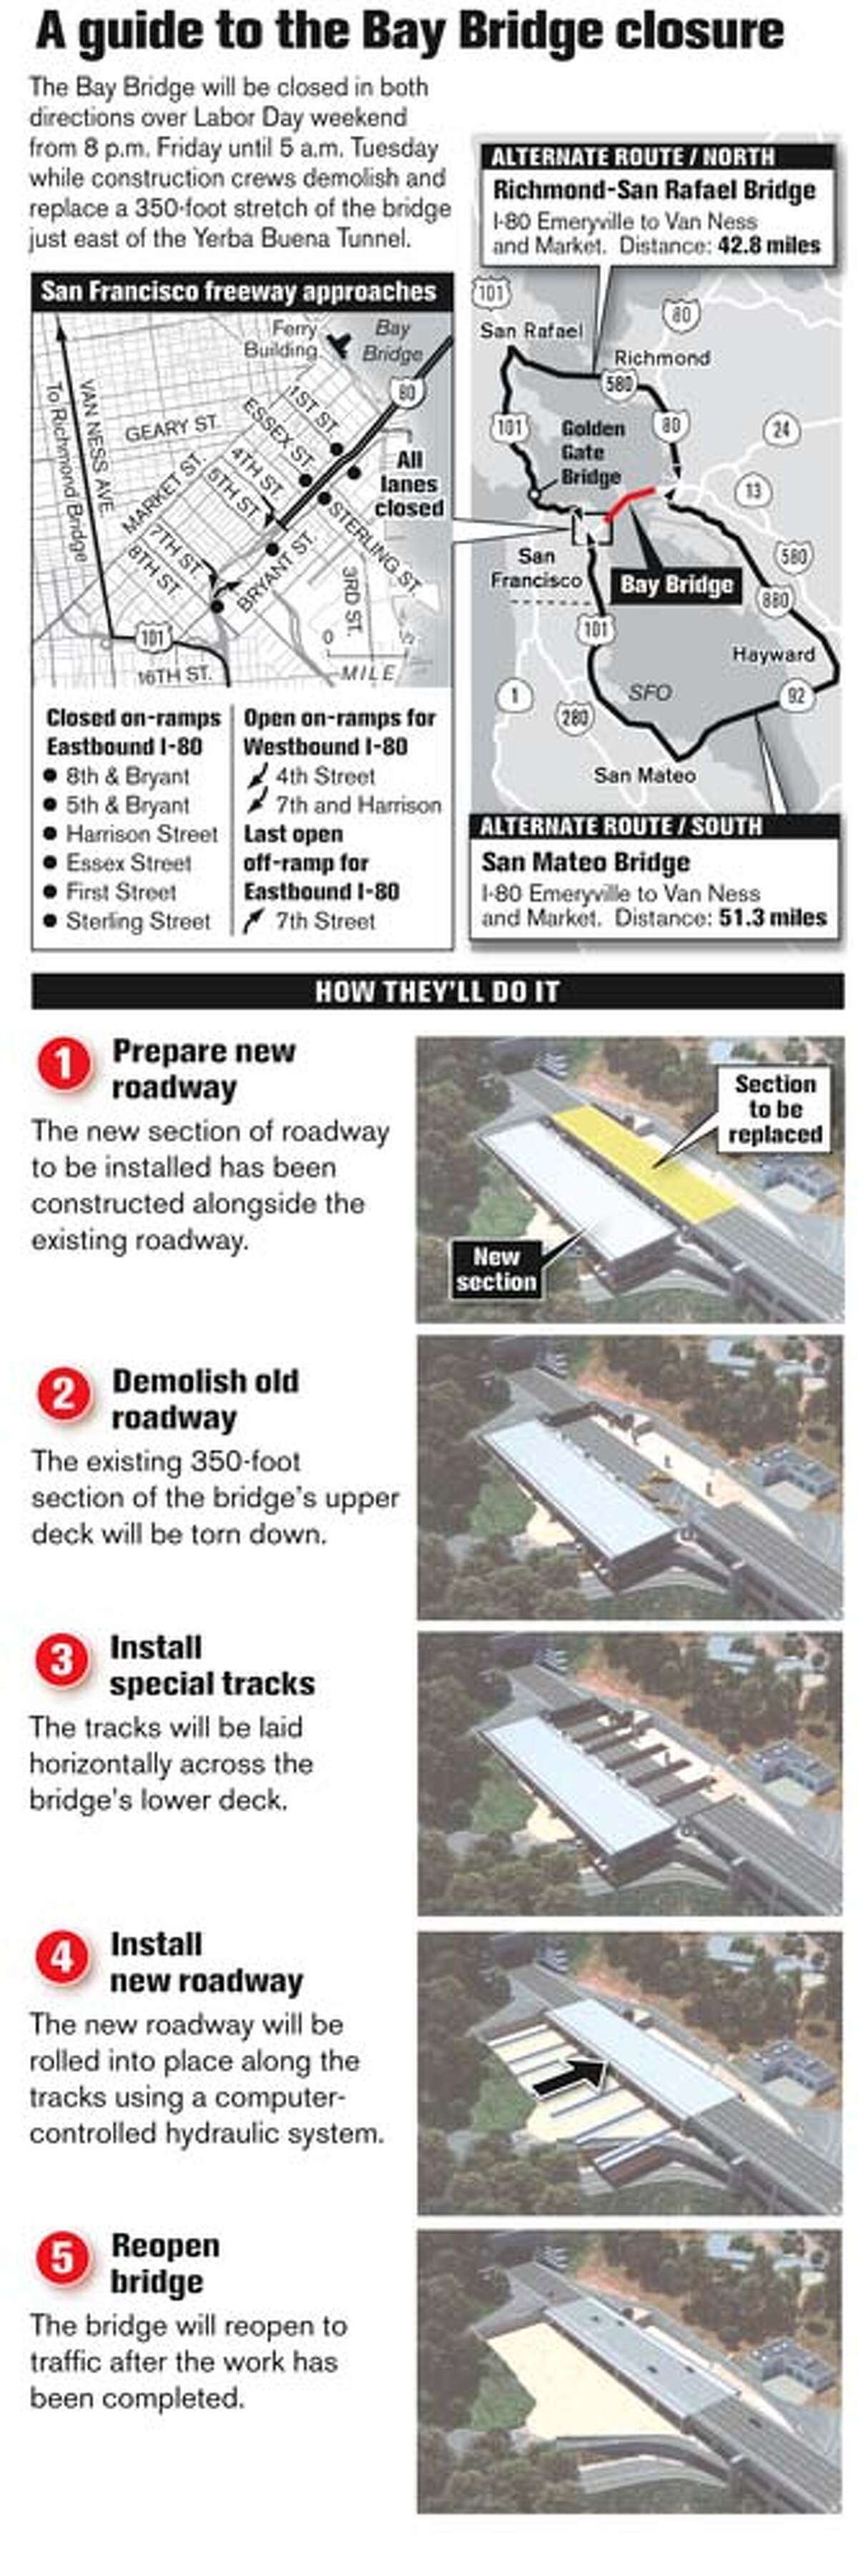 A guide to the Bay Bridge closure. Chronicle Graphic